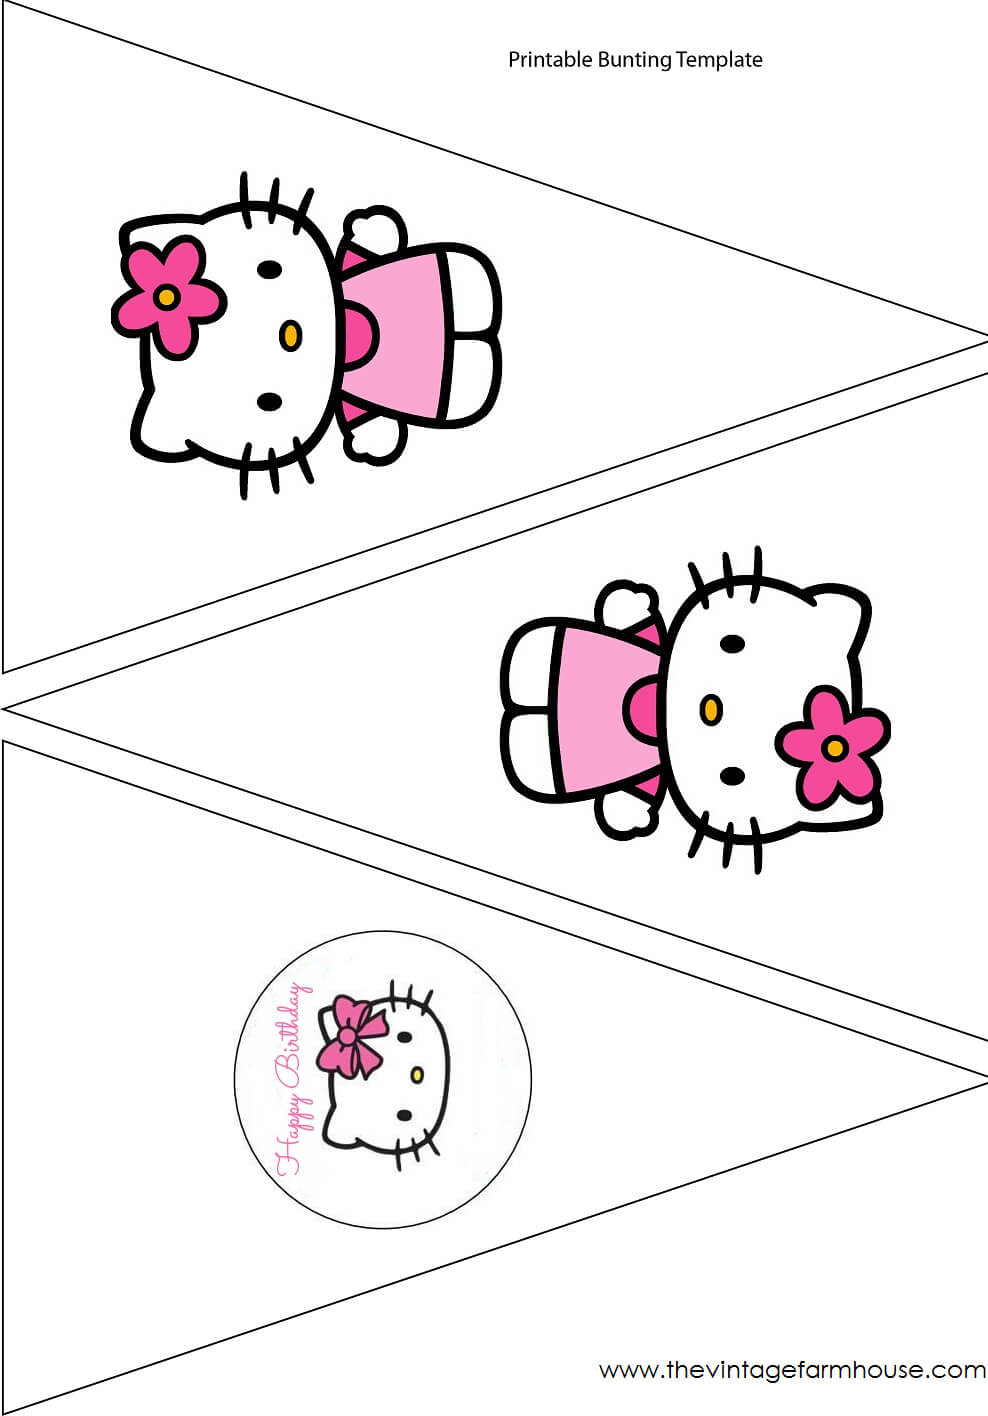 Simple Cute Hello Kitty Free Printable Kit. - Oh My Fiesta With Hello Kitty Banner Template